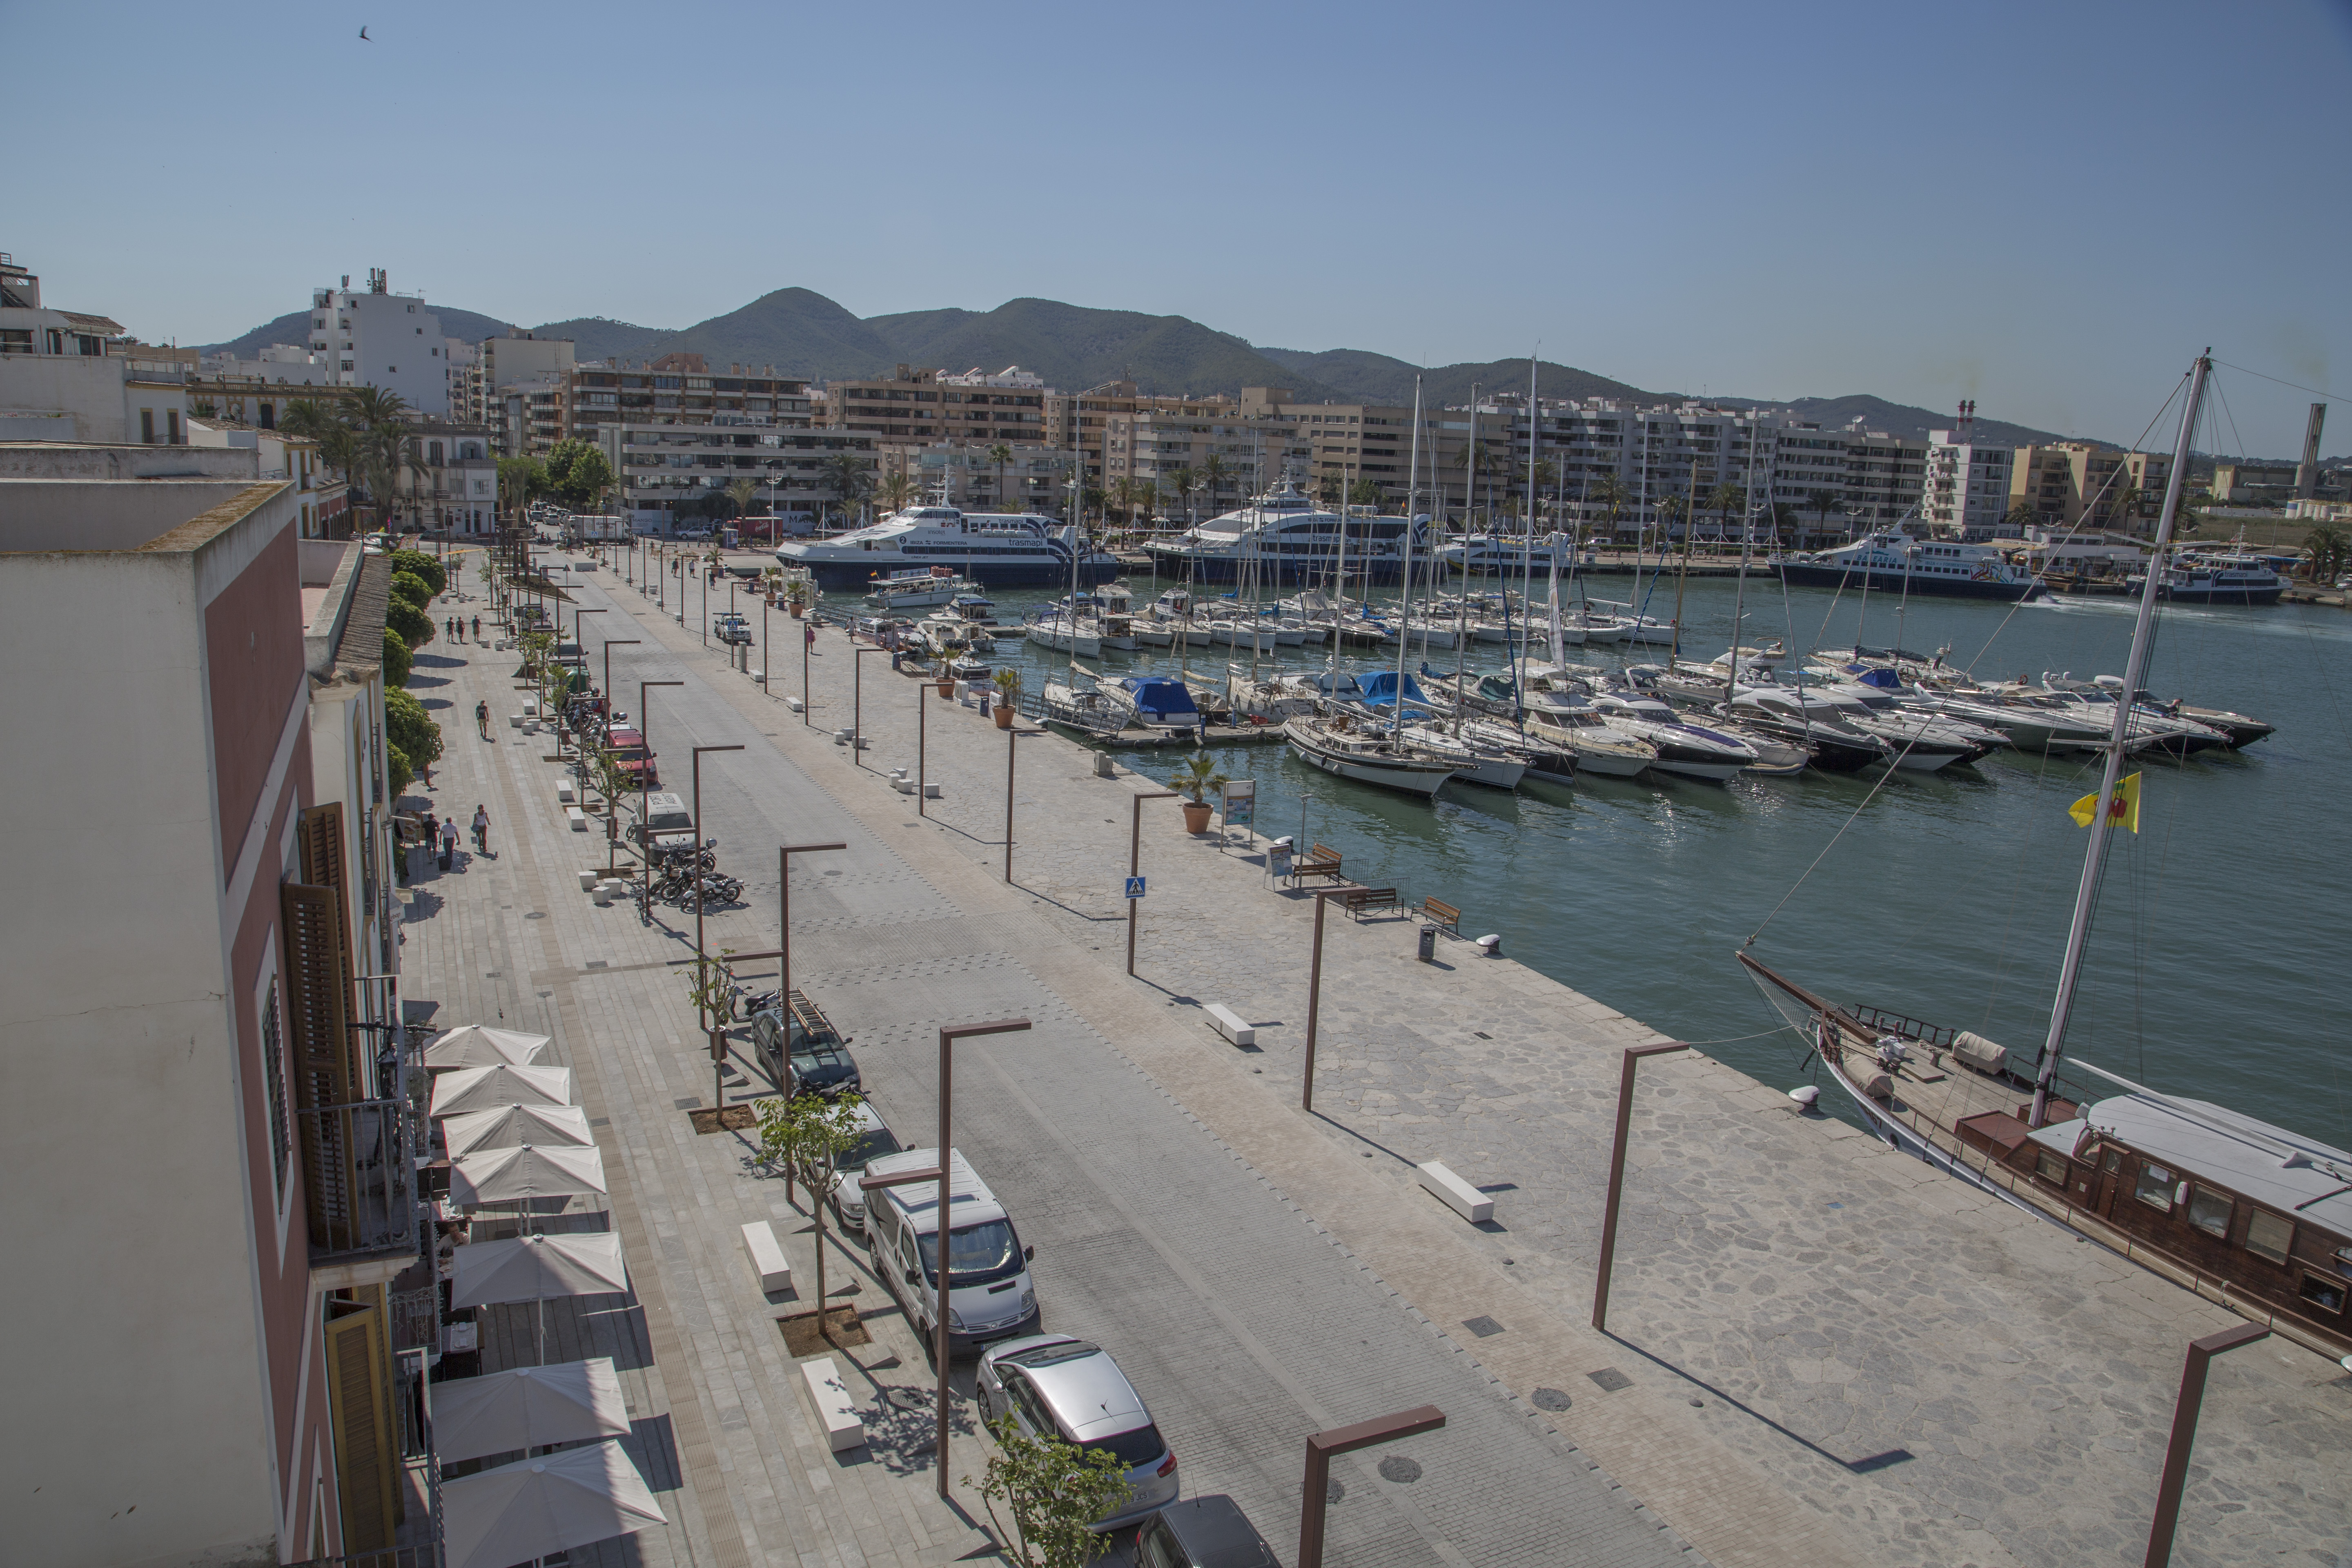 The APB removes the barrier on Paseo de la Marina in the port of Ibiza and allows vehicles to park until March